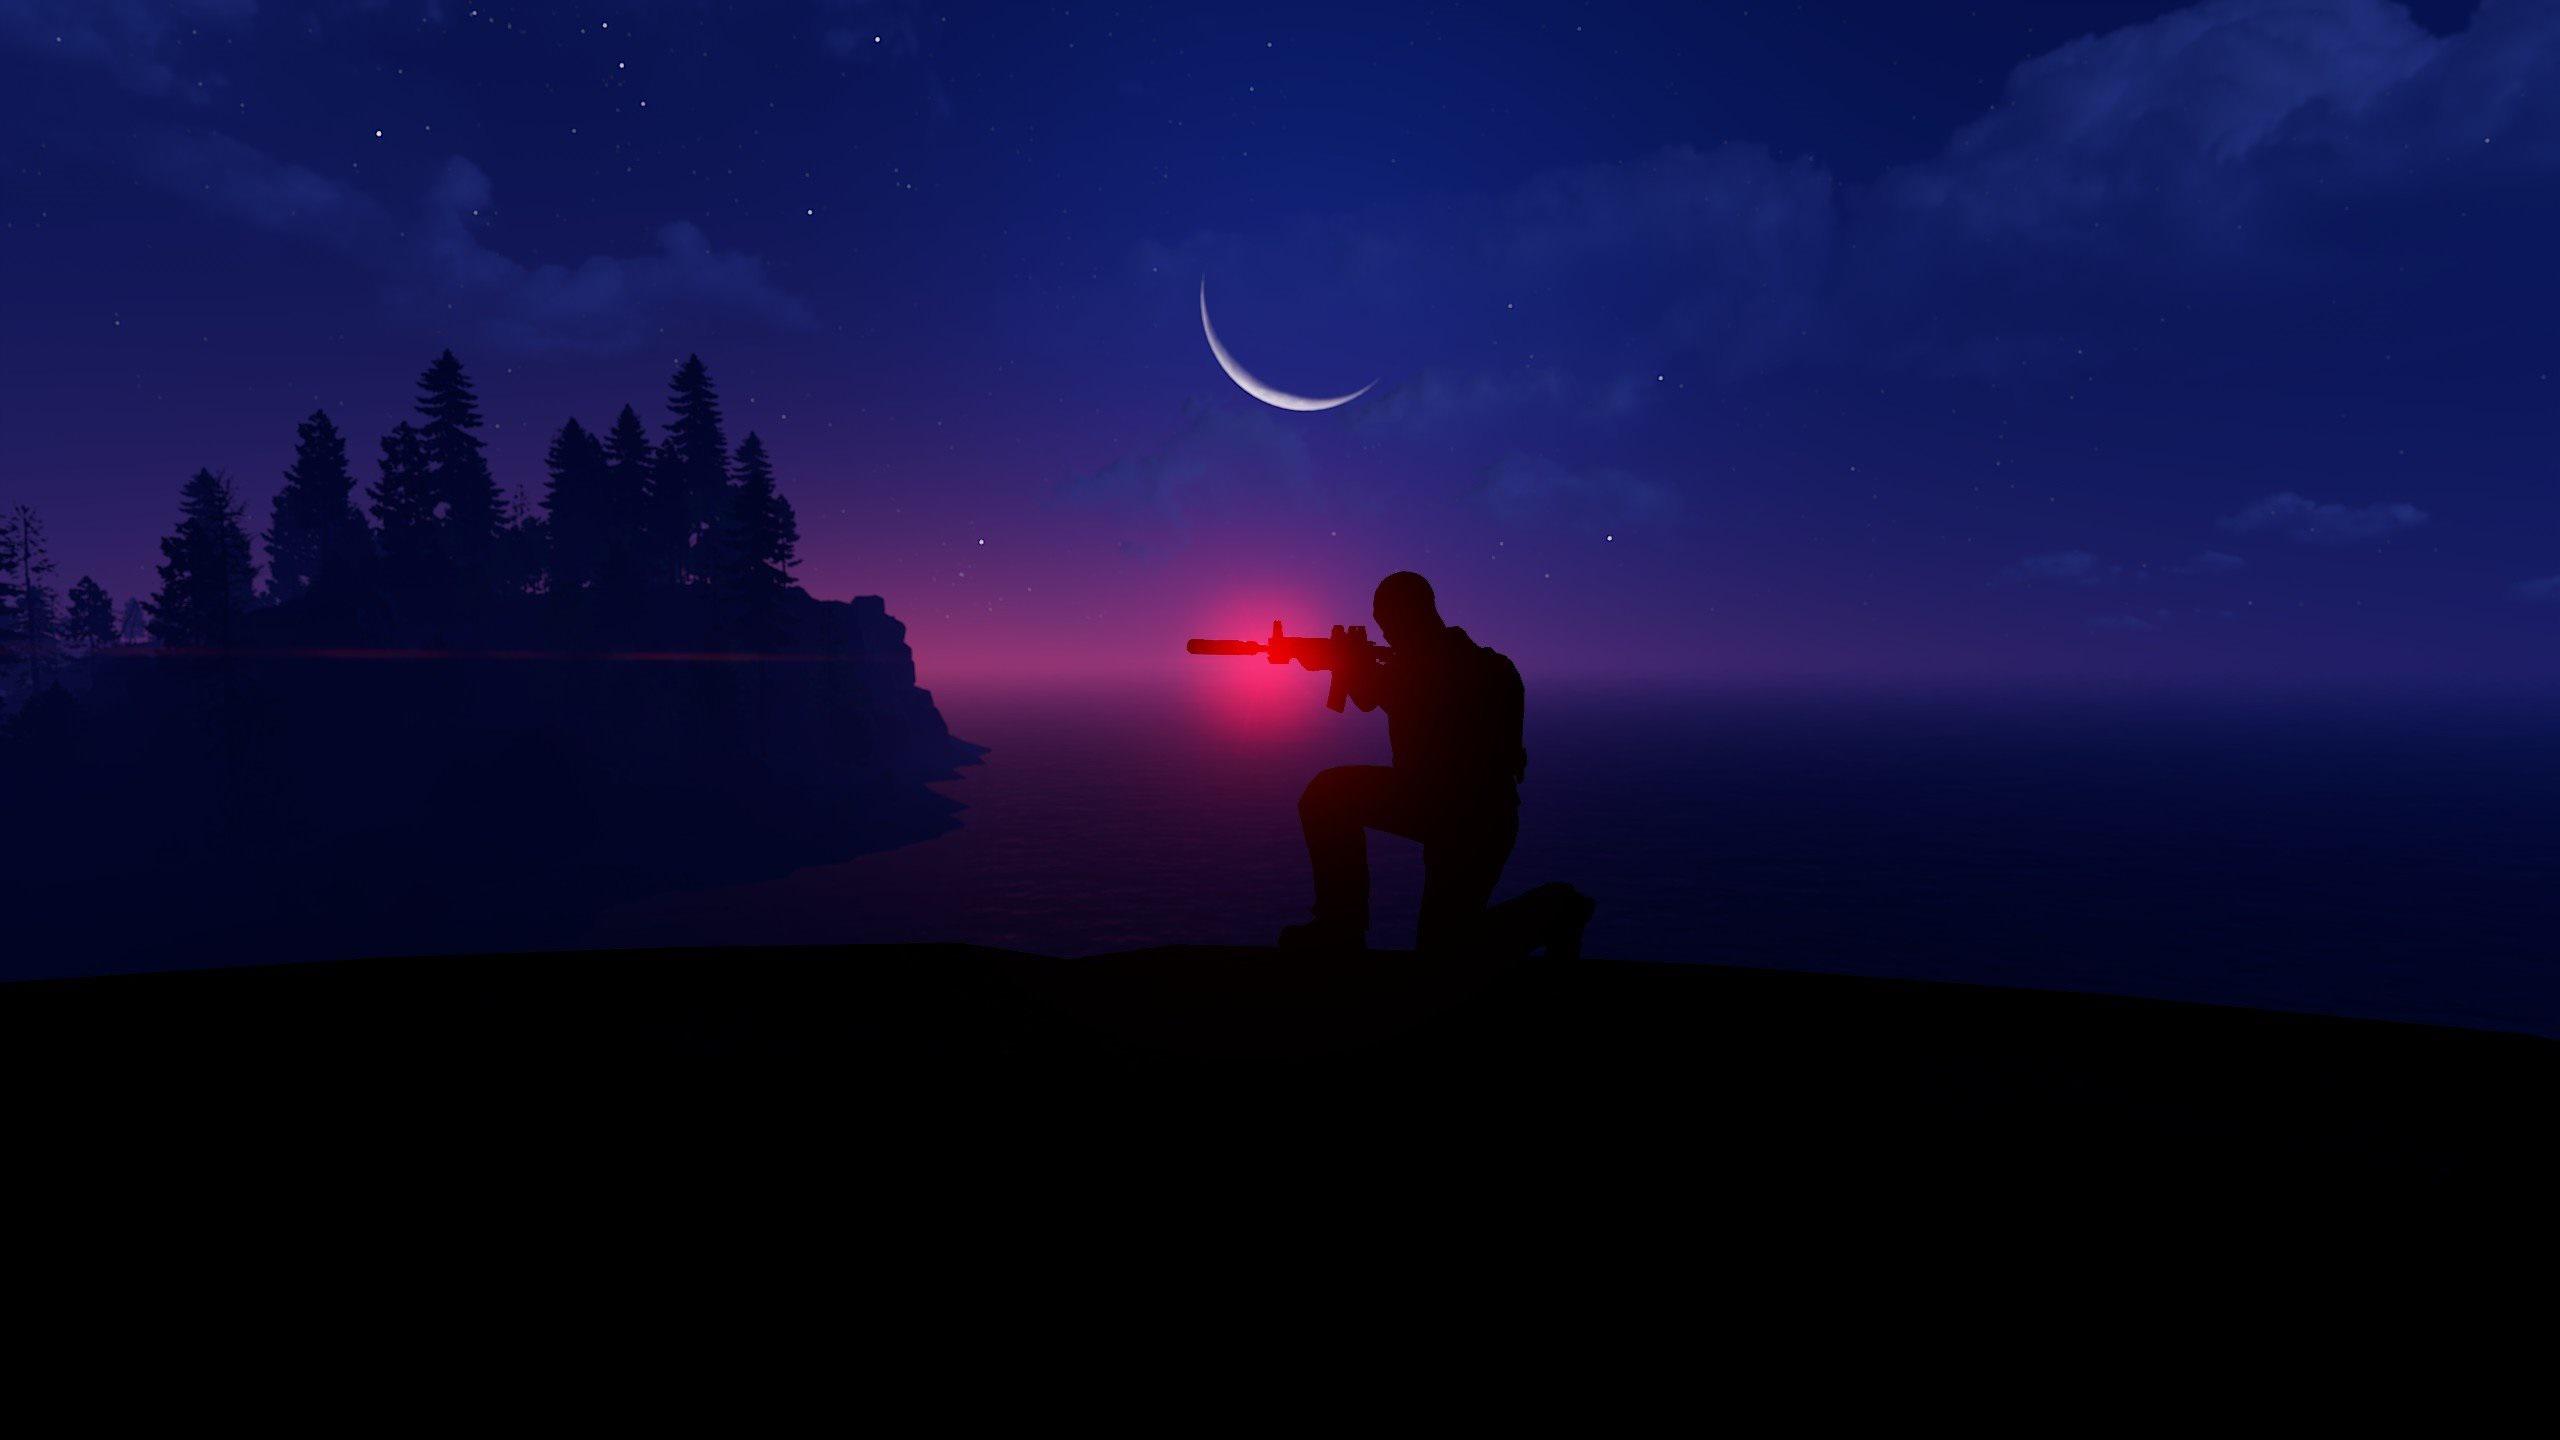 Rust wallpaper[2560x1440]: credit to my brother for being